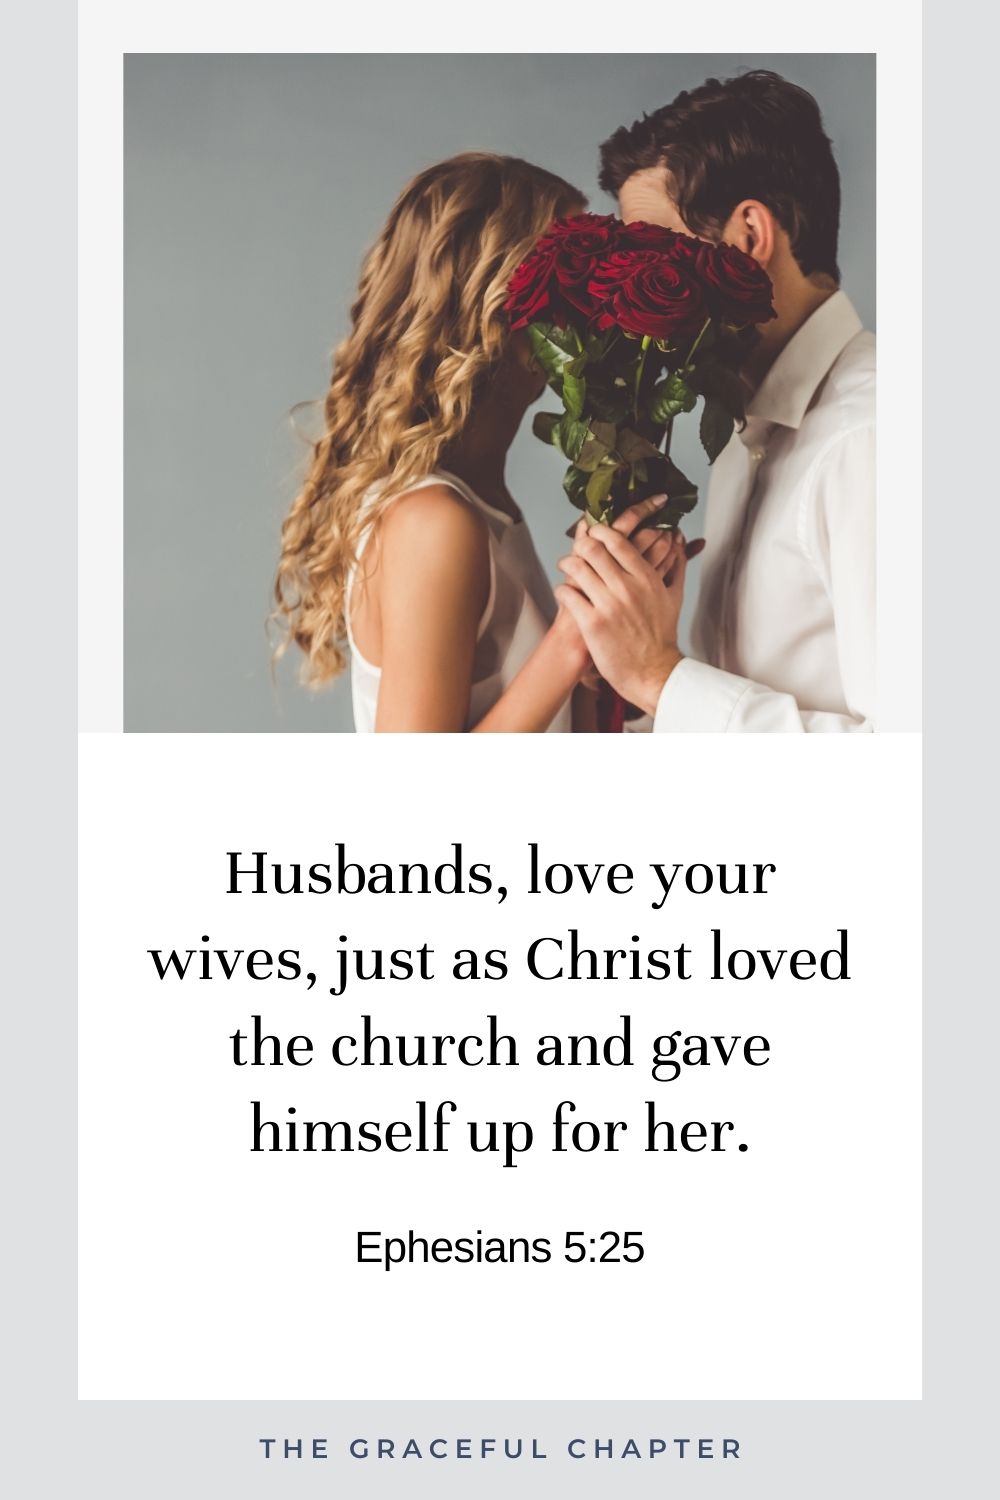 Husbands, love your wives, just as Christ loved the church and gave himself up for her. Ephesians 5:25